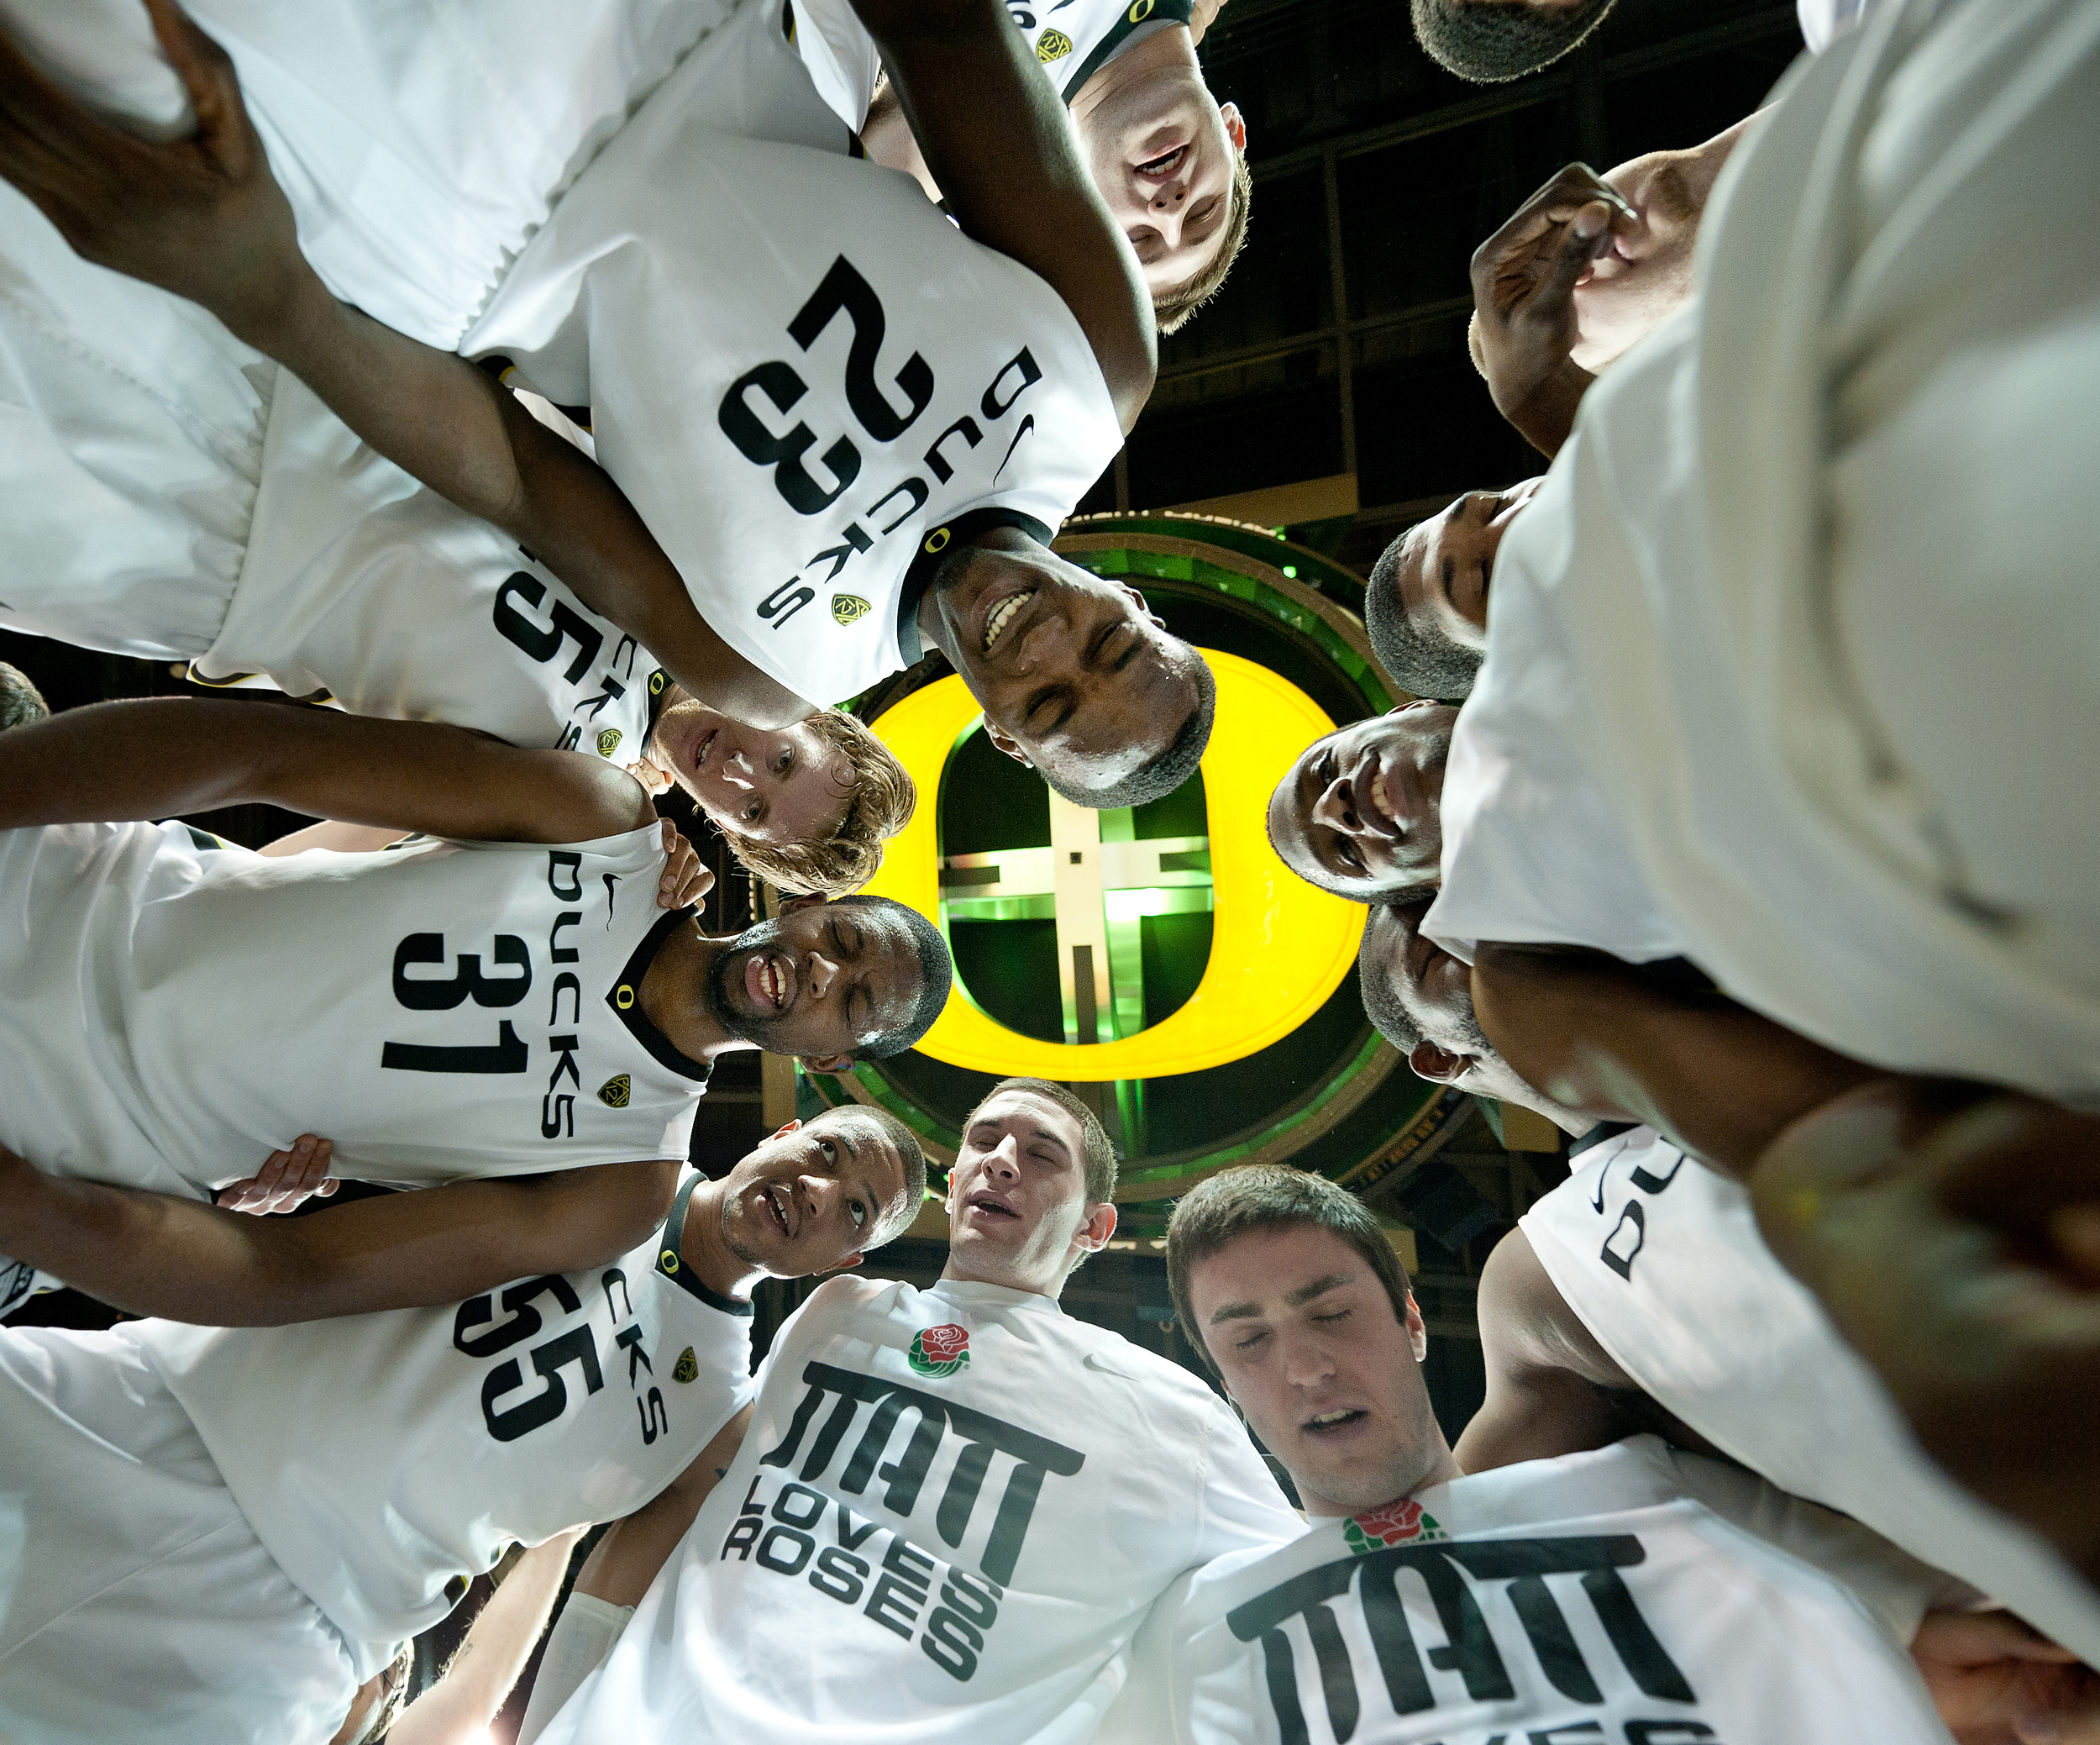  EUGENE, OR – The Oregon Ducks gather in the center of the Matthew Knight Arena court for a post game celebration huddle following their 75-68 victory over the Bruins on Saturday, January 21, 2012. 